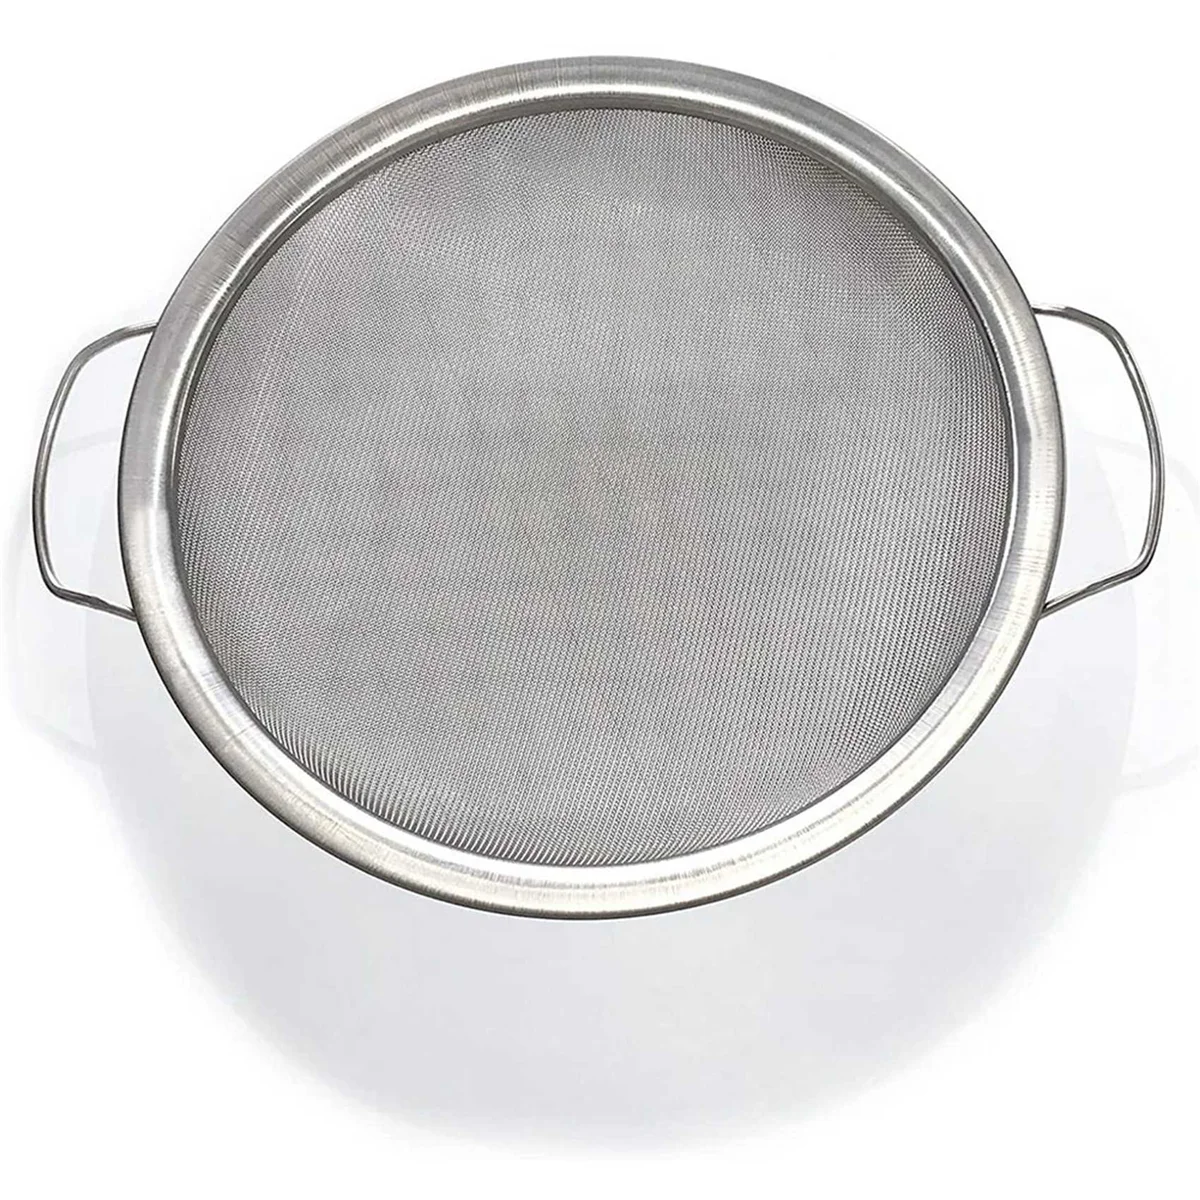 

250 Micrometres Paint Strainer Fits a 5 Gallon Bucket, Filter Impurities and Protect the Airless Sprayer,Easy to Clean